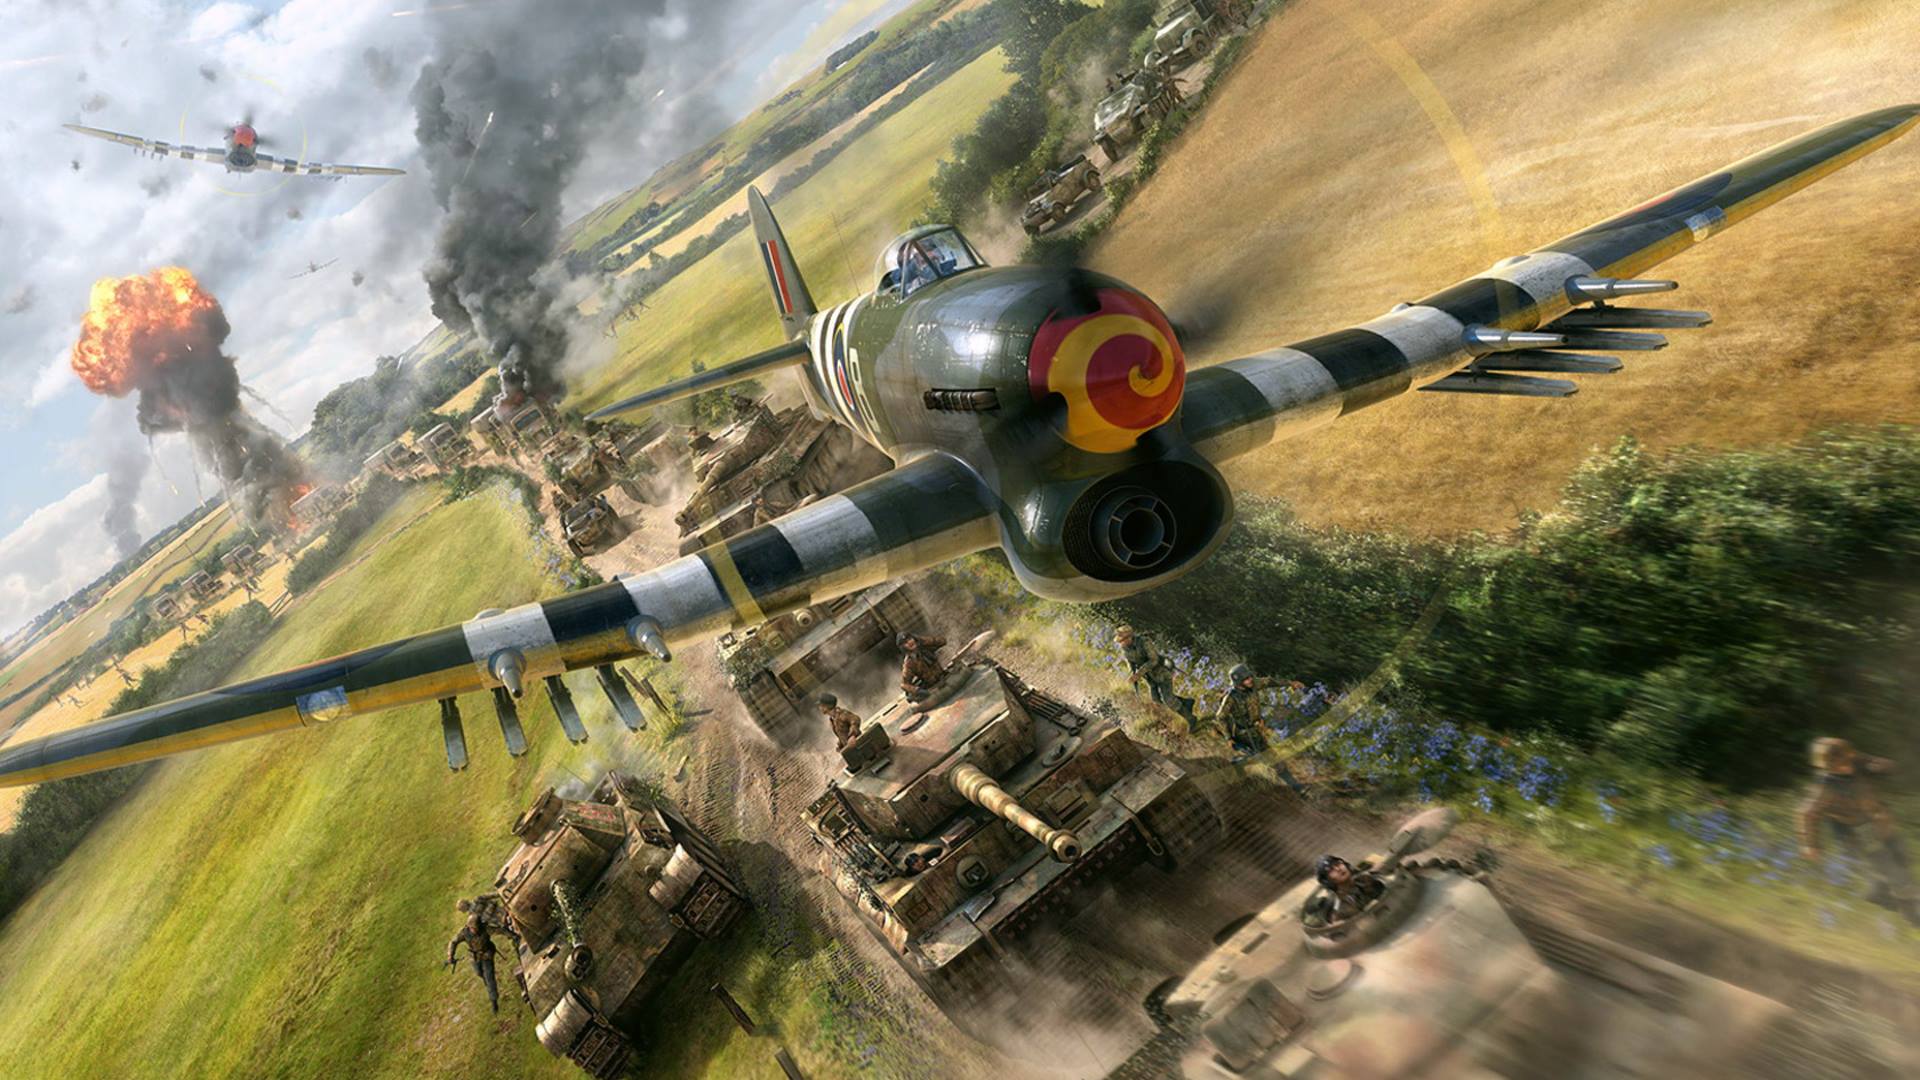 Looking For WWII Aircraft Wallpaper Subject 2 Sturmovik Forum